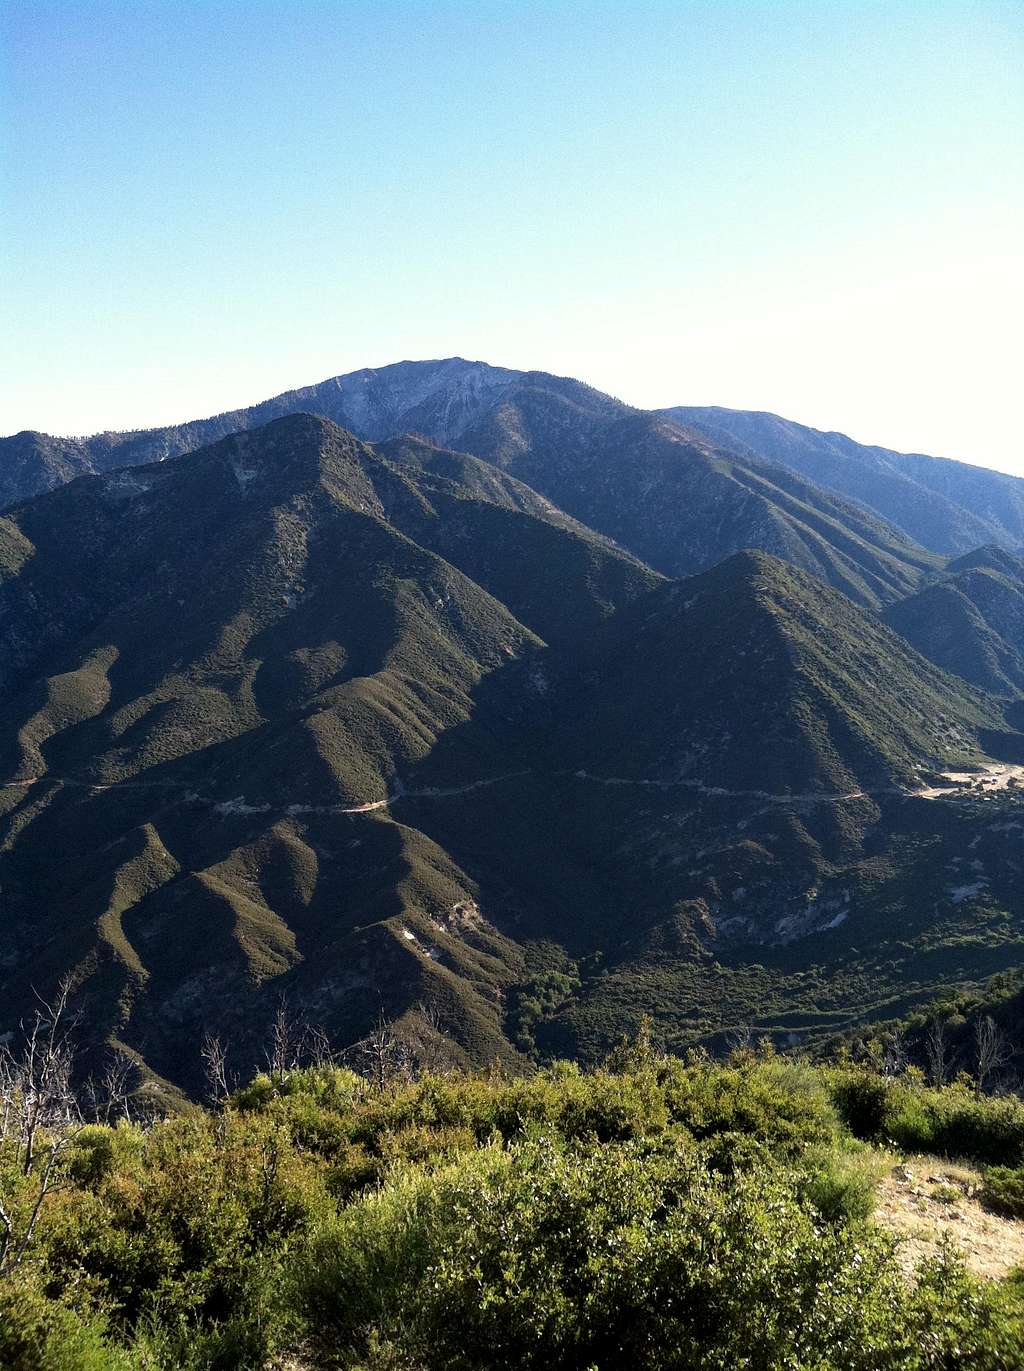 View of Mount Baldy